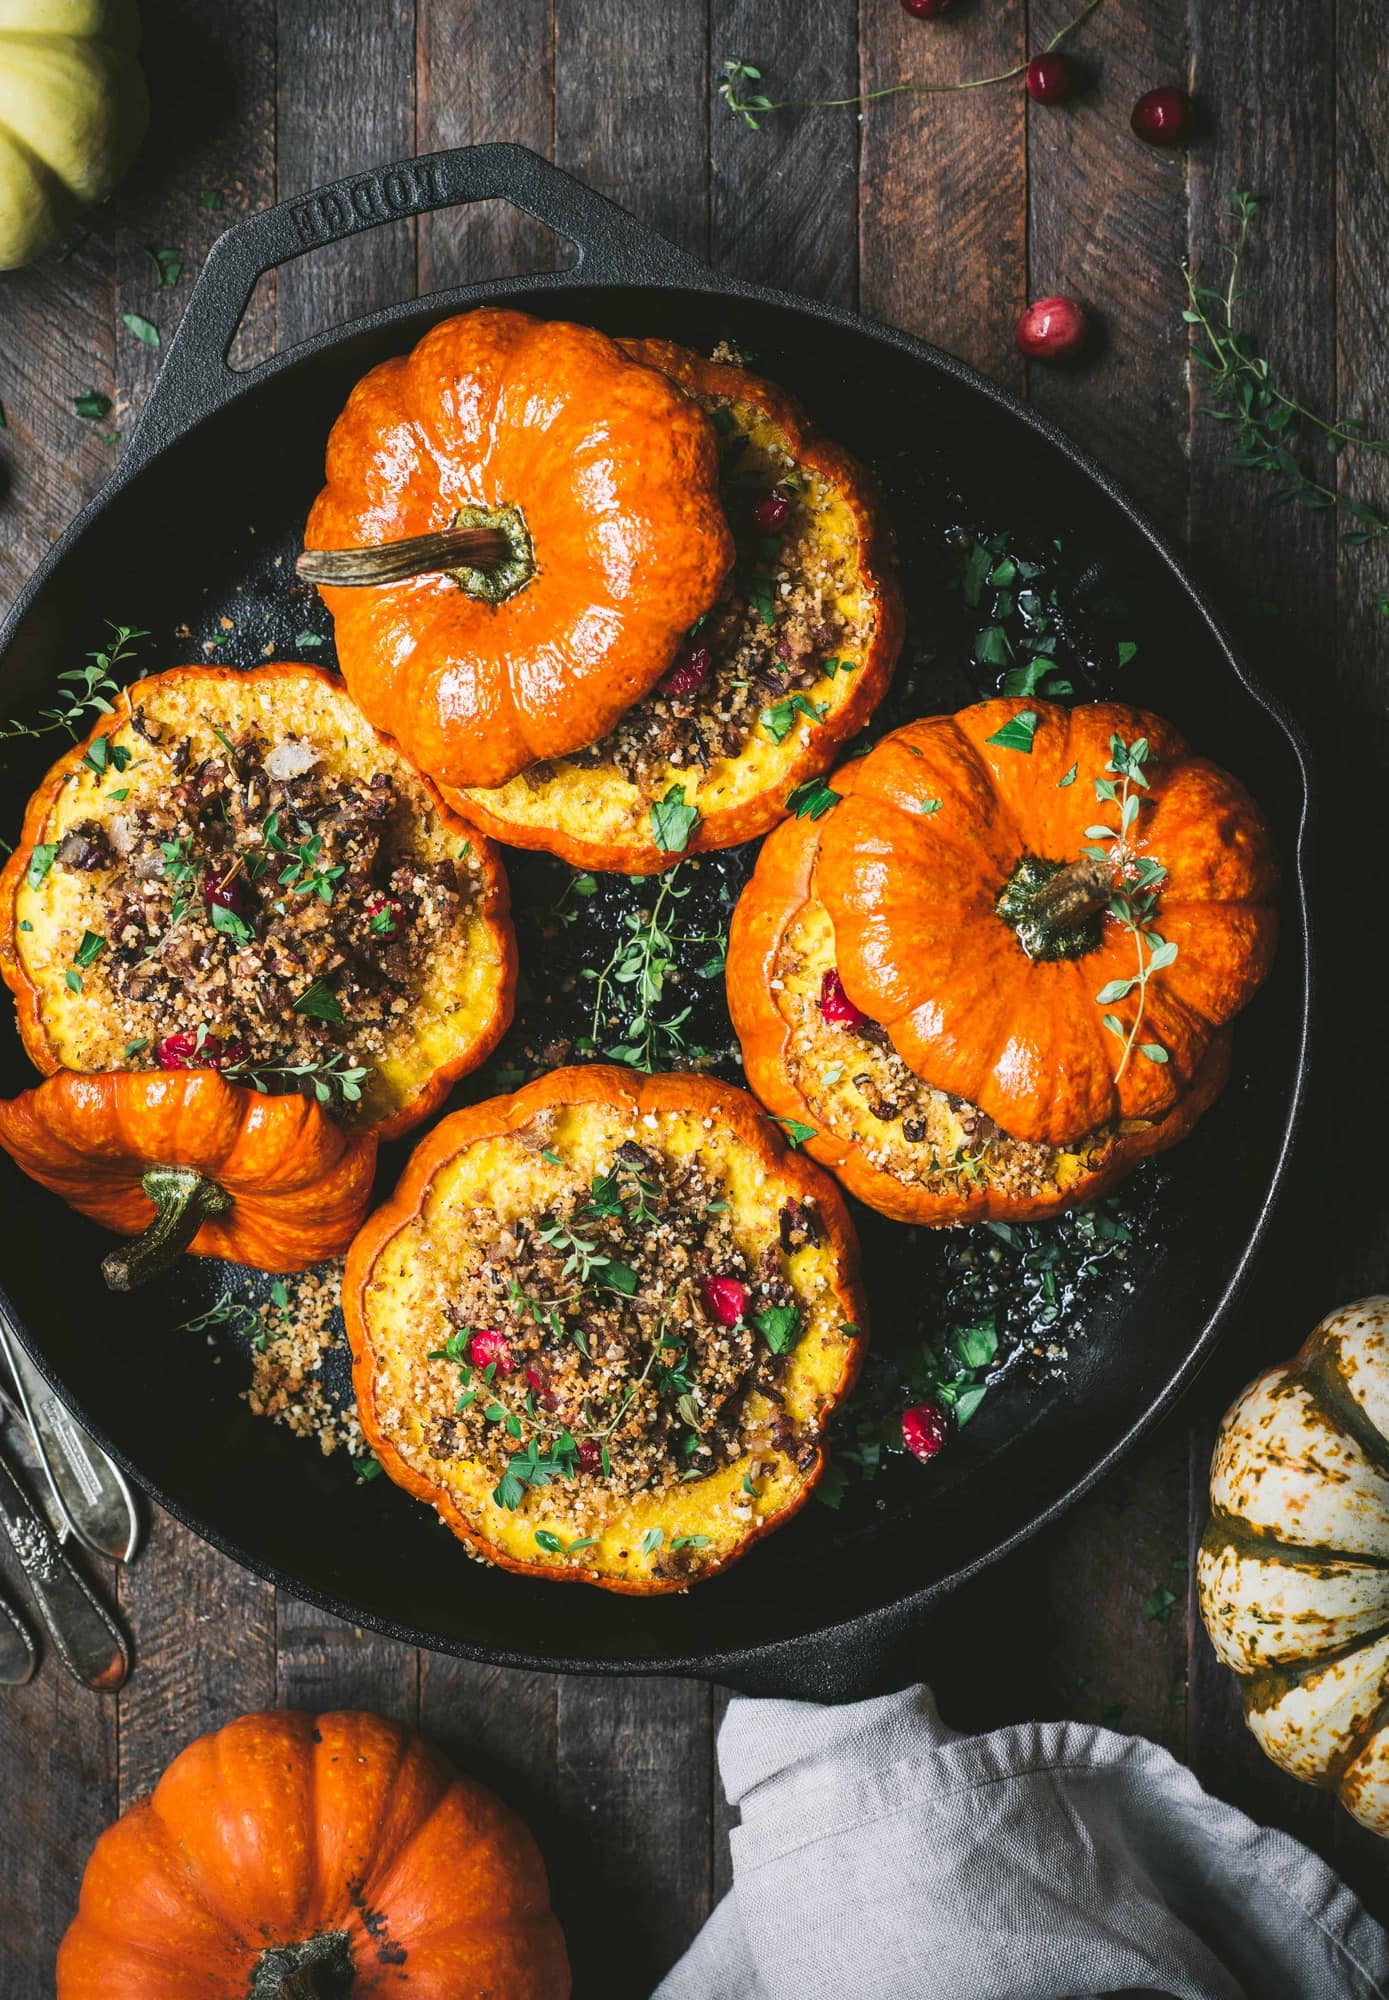 Overhead view of 4 Stuffed Mini Pumpkins with Wild Rice and Mushrooms in a cast iron skillet